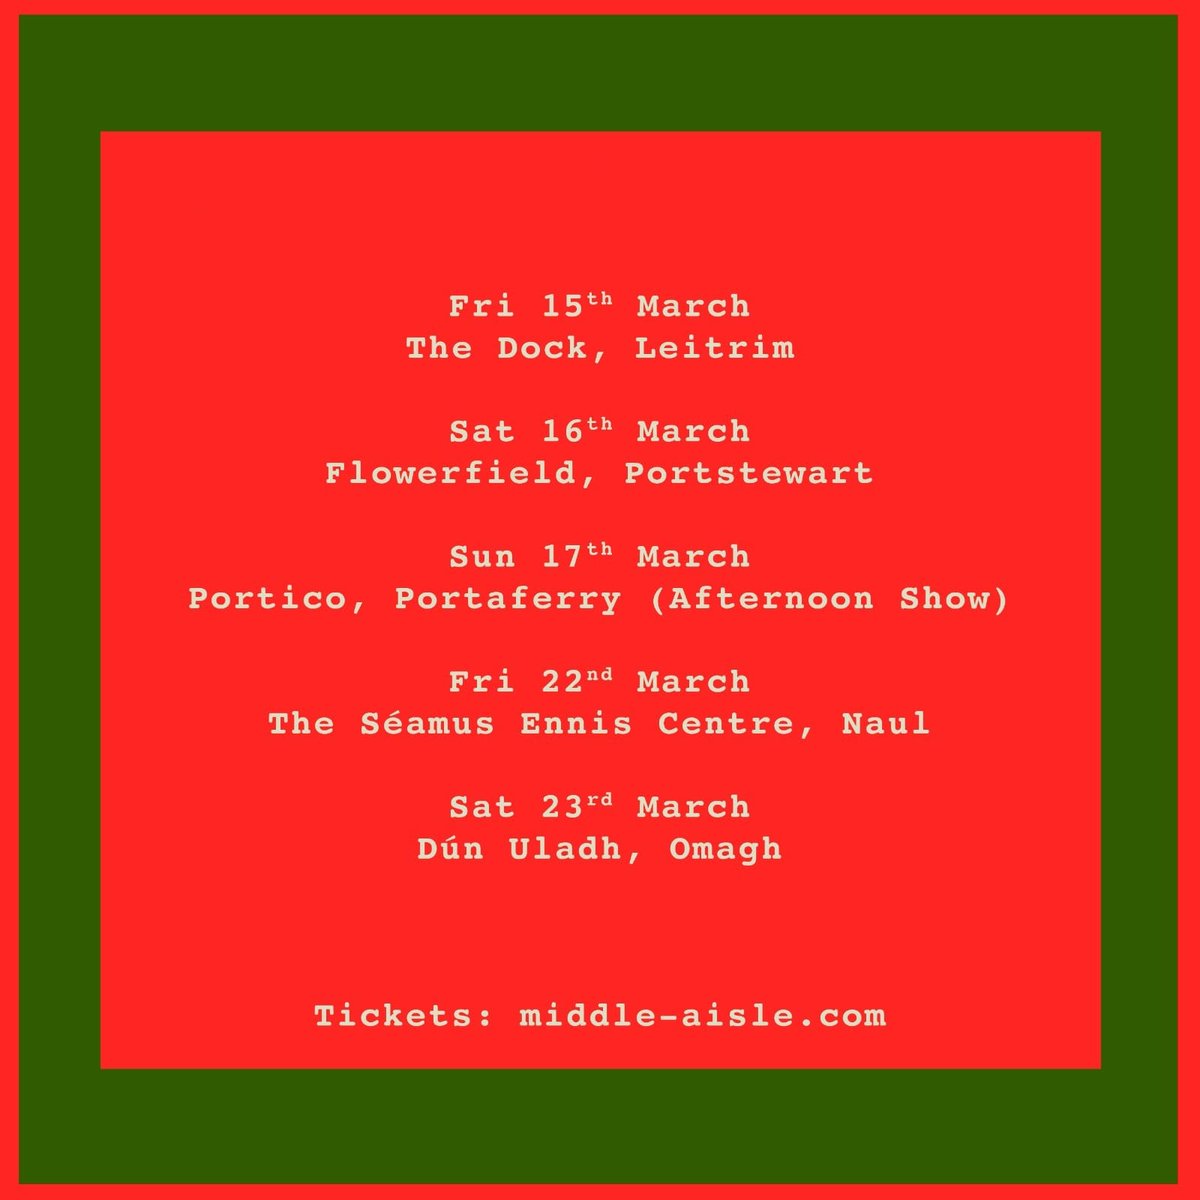 A bunch of @realtamusic dates in Ireland around St. Patricks. What's not to like?! Continuing the collaborative run w/ @myles_mccormack in support of their new album 'Thing Of The Earth' Tickets: middle-aisle.com/upcoming-gigs/